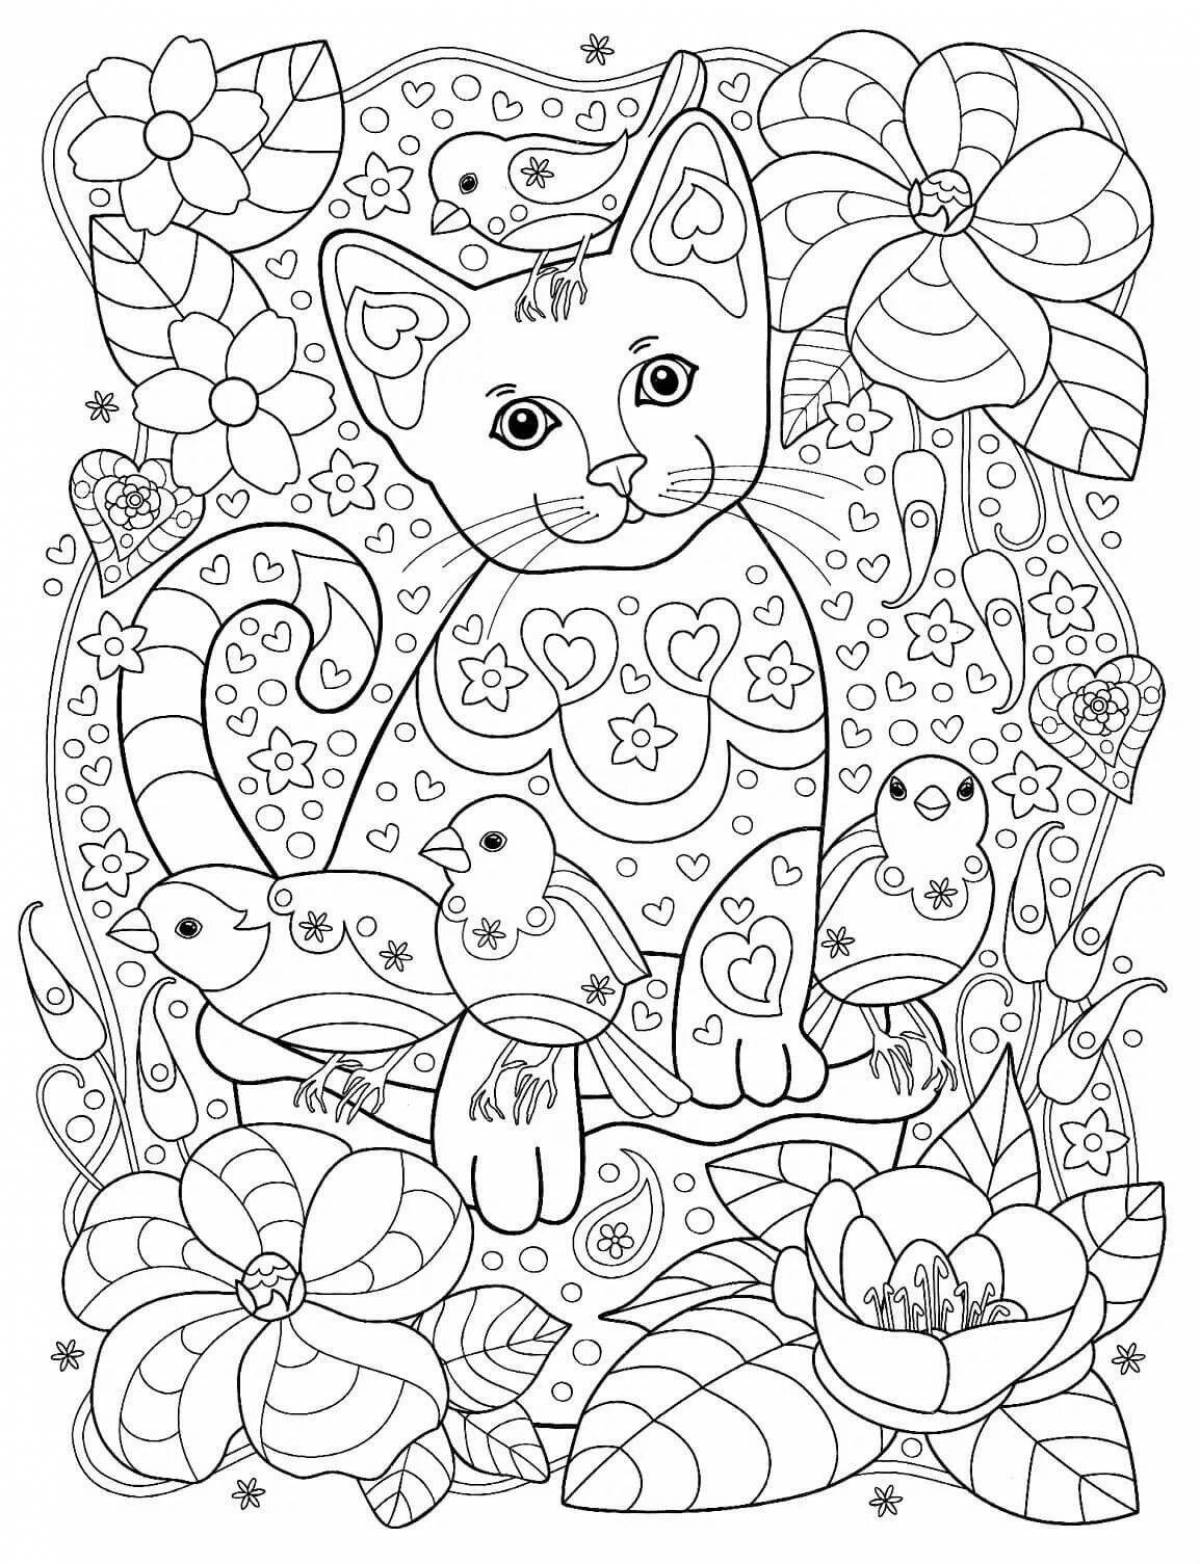 Coloring bright cat by numbers